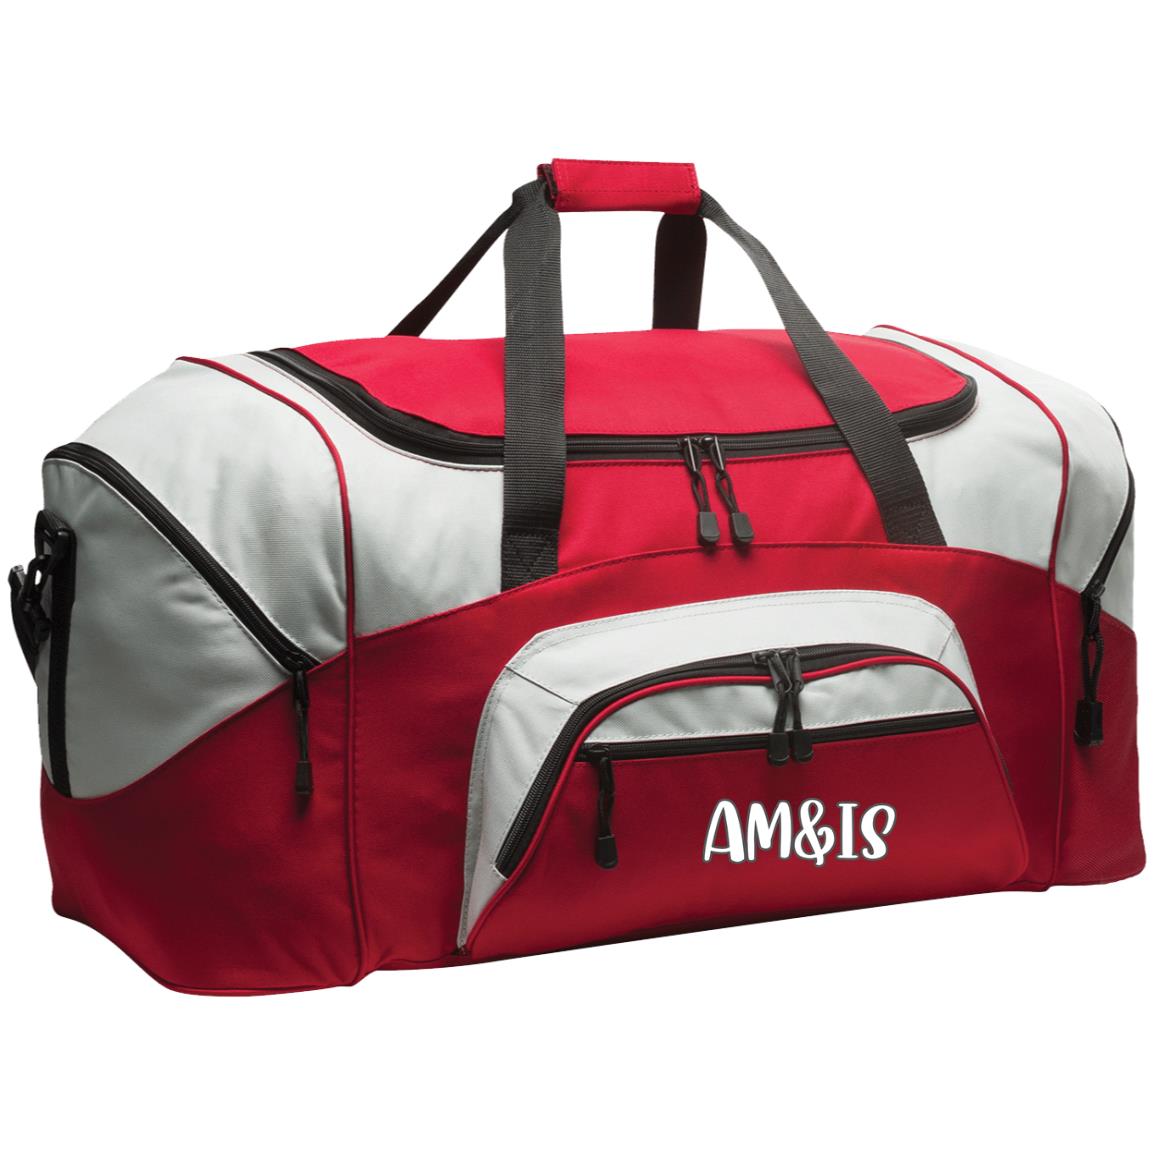 RED/GRAY ONE SIZE - AM&IS Activewear Colorblock Sport Duffel - duffel bag at TFC&H Co.